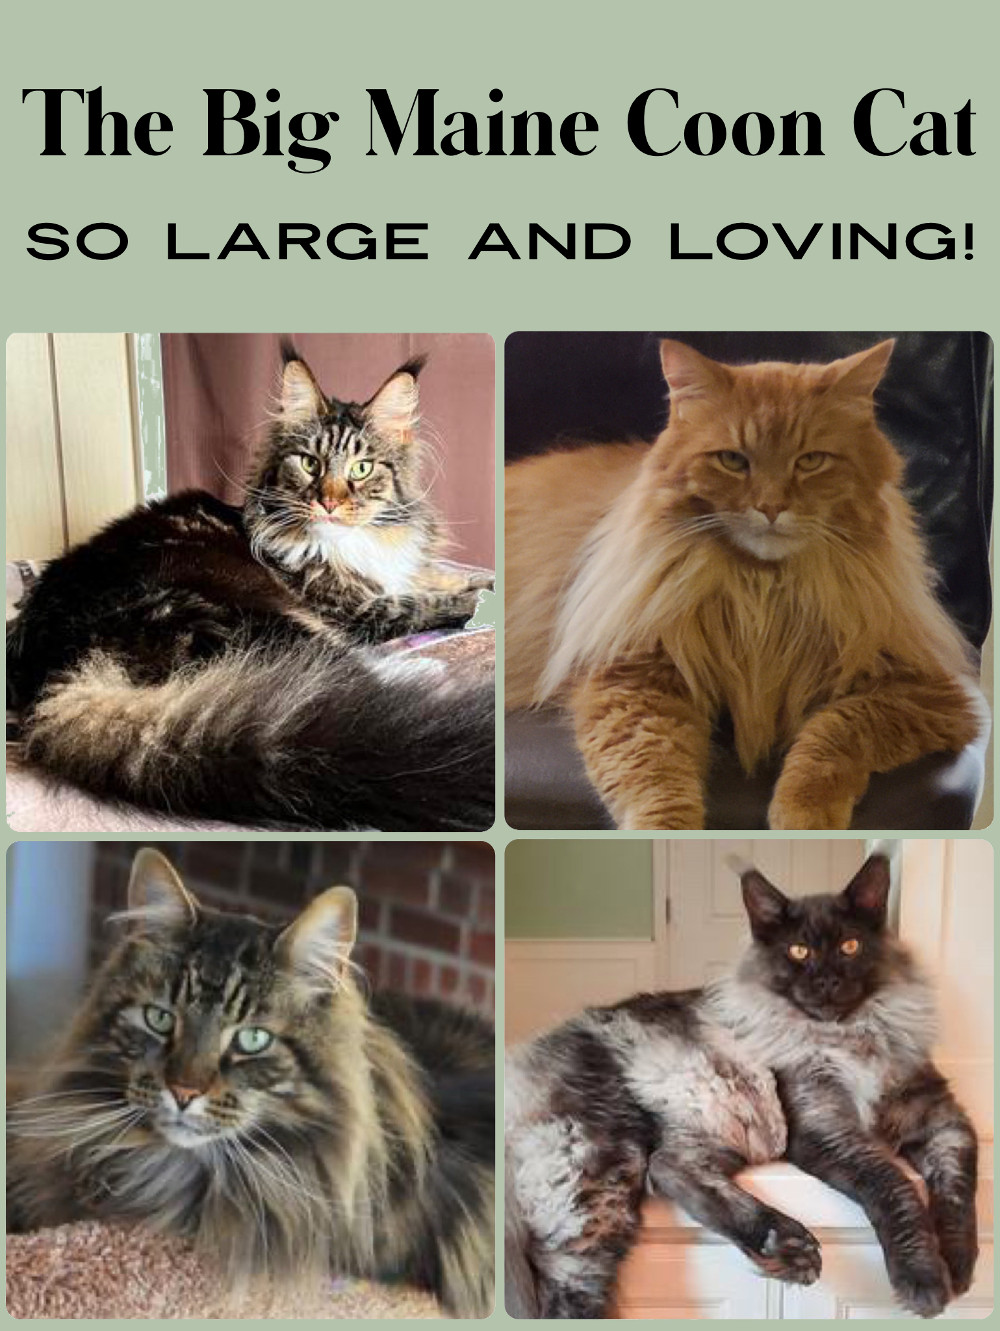 Big Maine Coon Cats